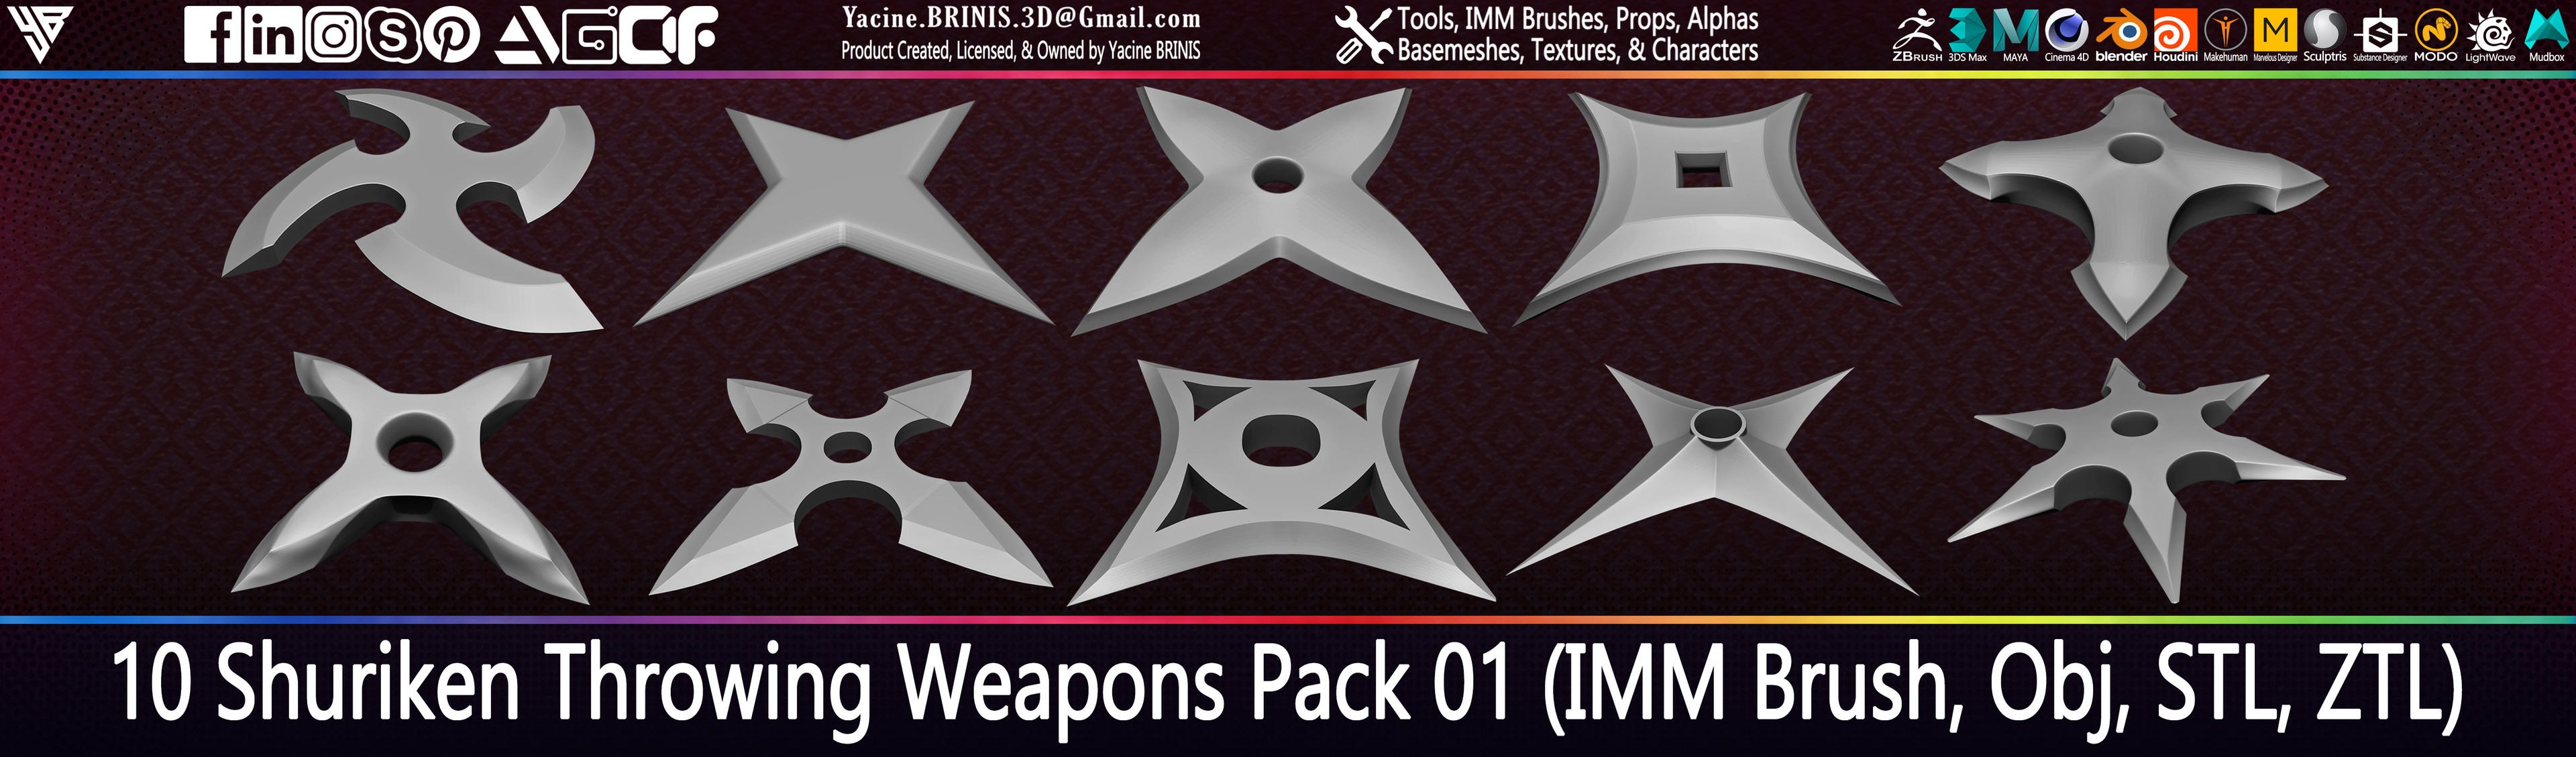 10 Shurikens Throwing Weapon Pack 01 sculpted by Yacine BRINIS Set 14